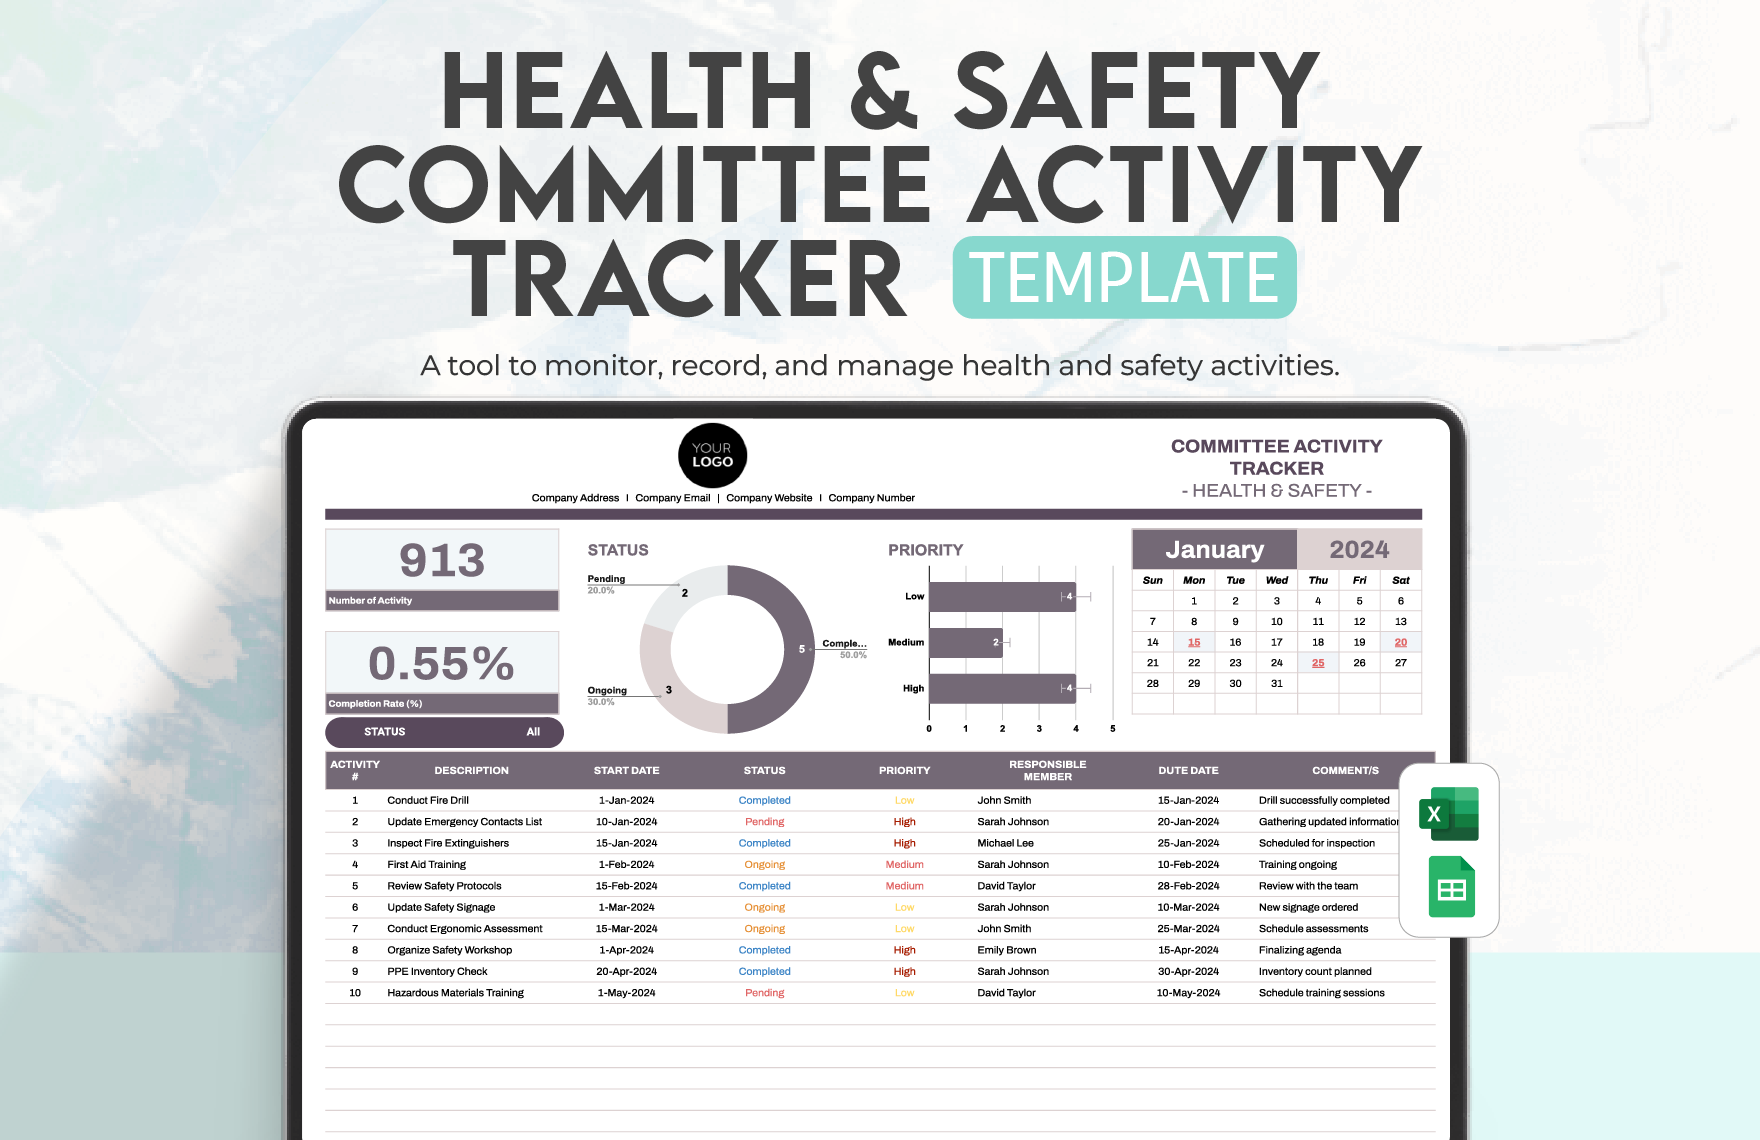 Health & Safety Committee Activity Tracker Template in Excel, Google Sheets